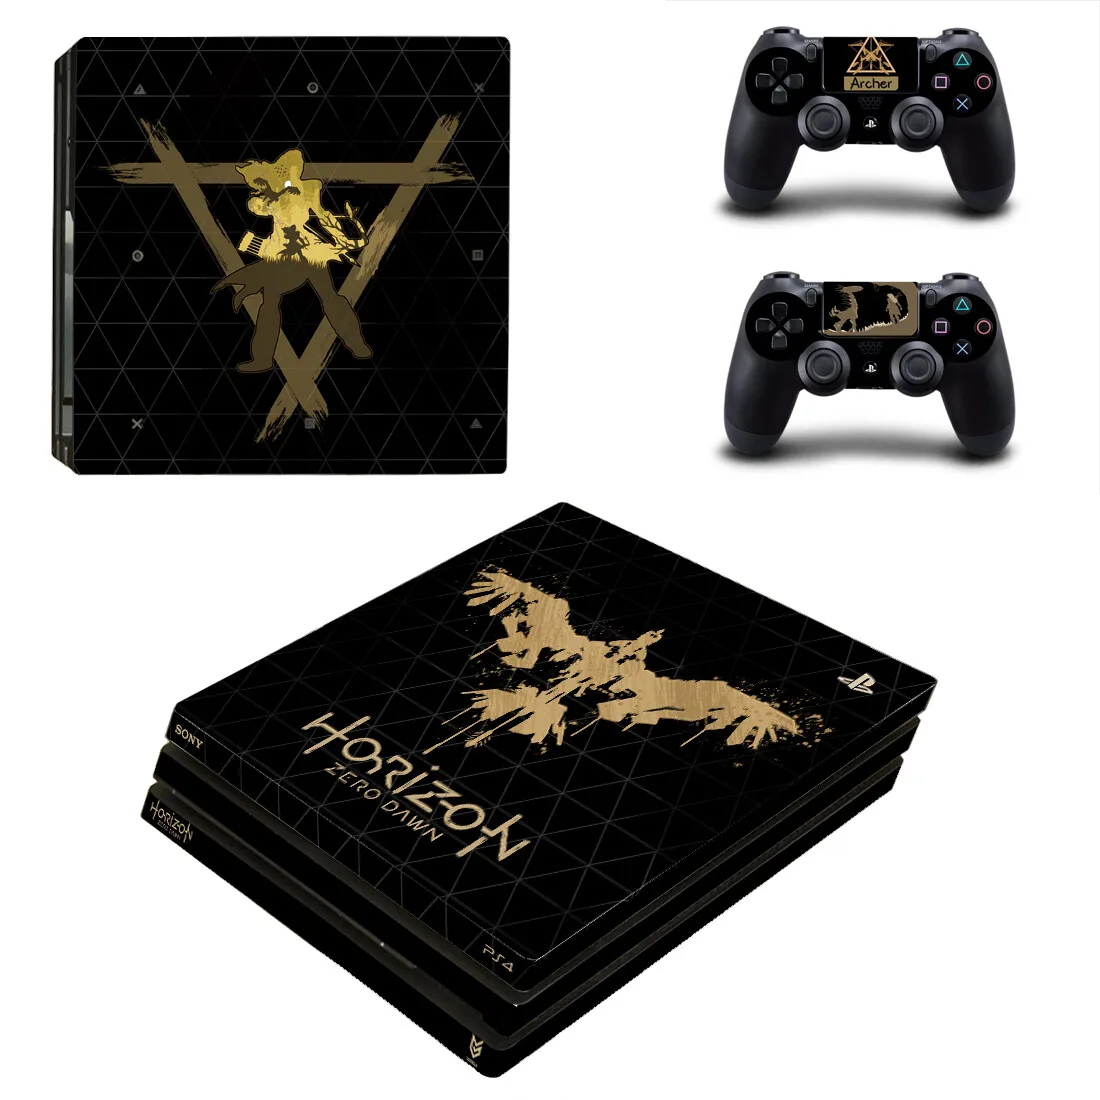 Horizon Zero Dawn PS4 Pro Skin Sticker Decals Cover For PlayStation 4 PS4 Pro Console & Controller Skins Vinyl